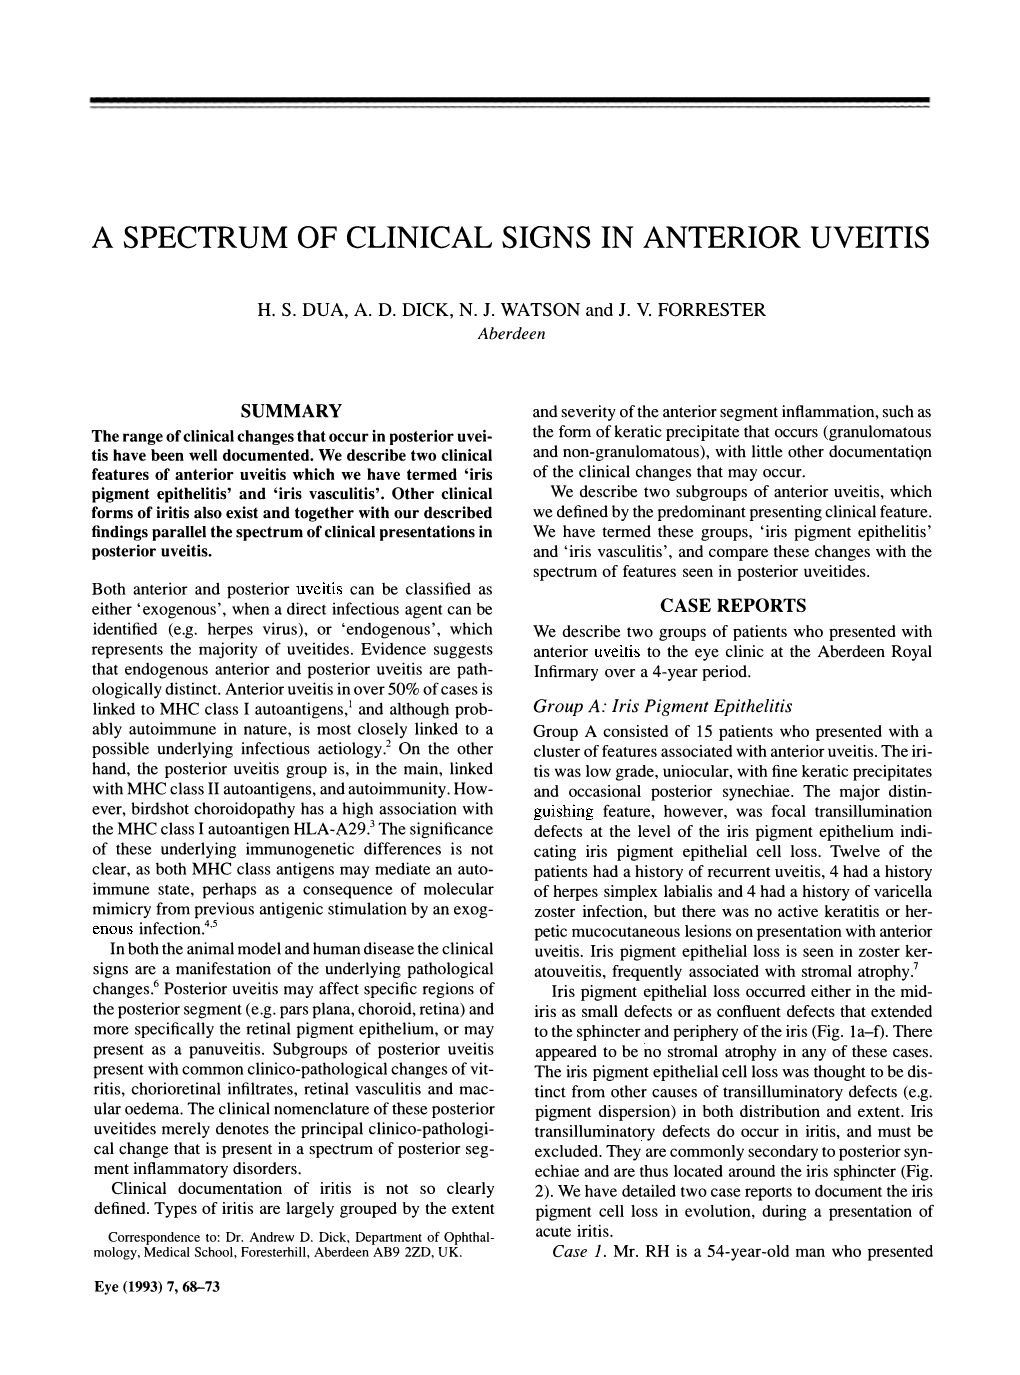 A Spectrum of Clinical Signs in Anterior Uveitis